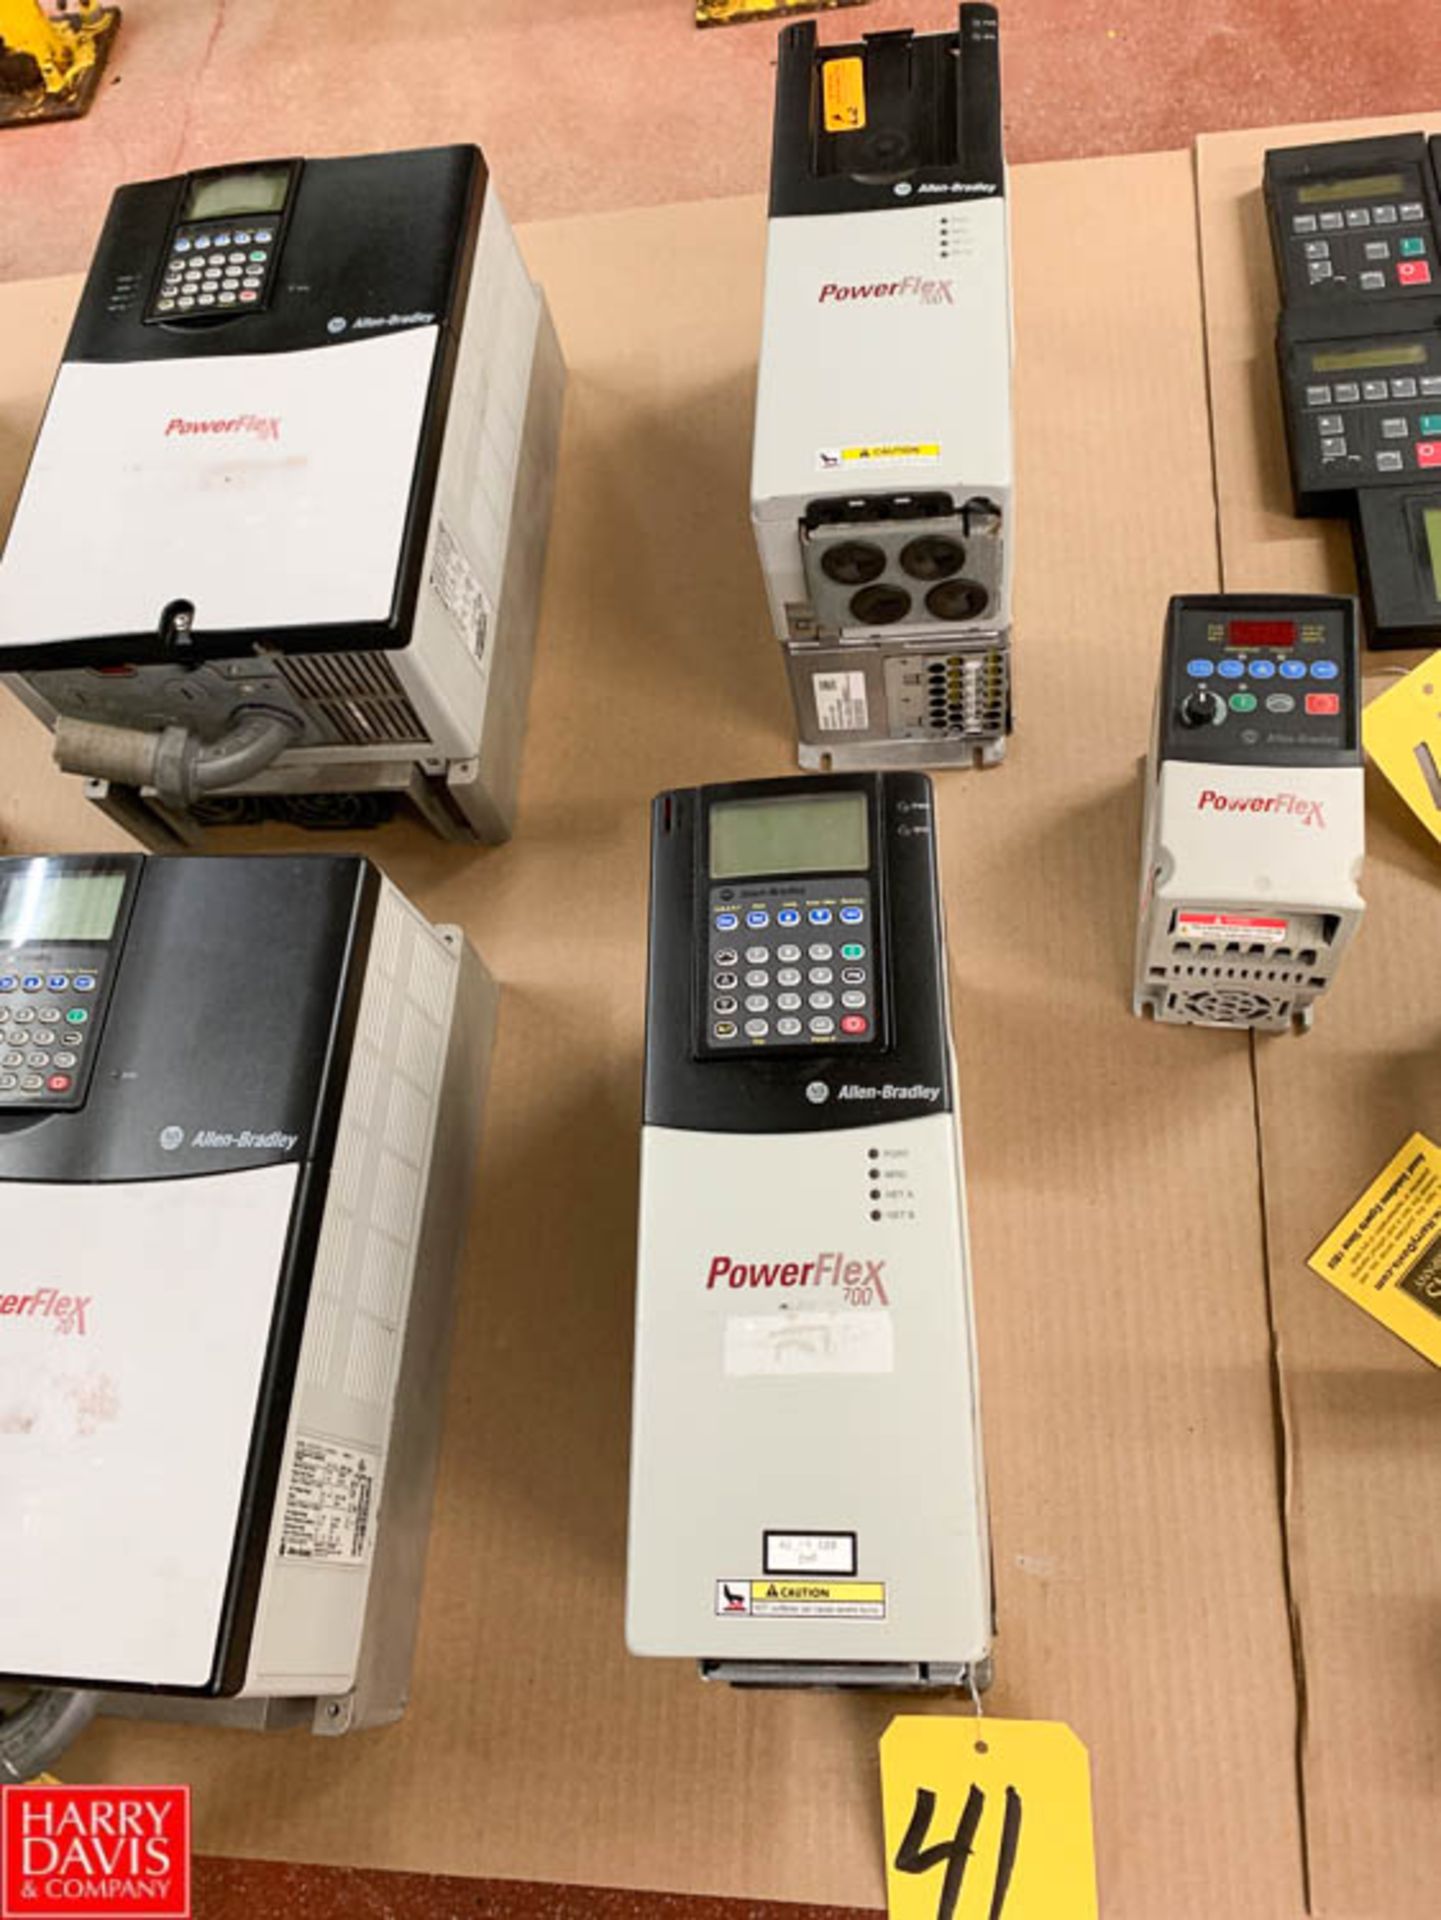 Allen Bradley 5 HP Power Flex 700 Variable Frequency Drives - Rigging Fee: $ 35